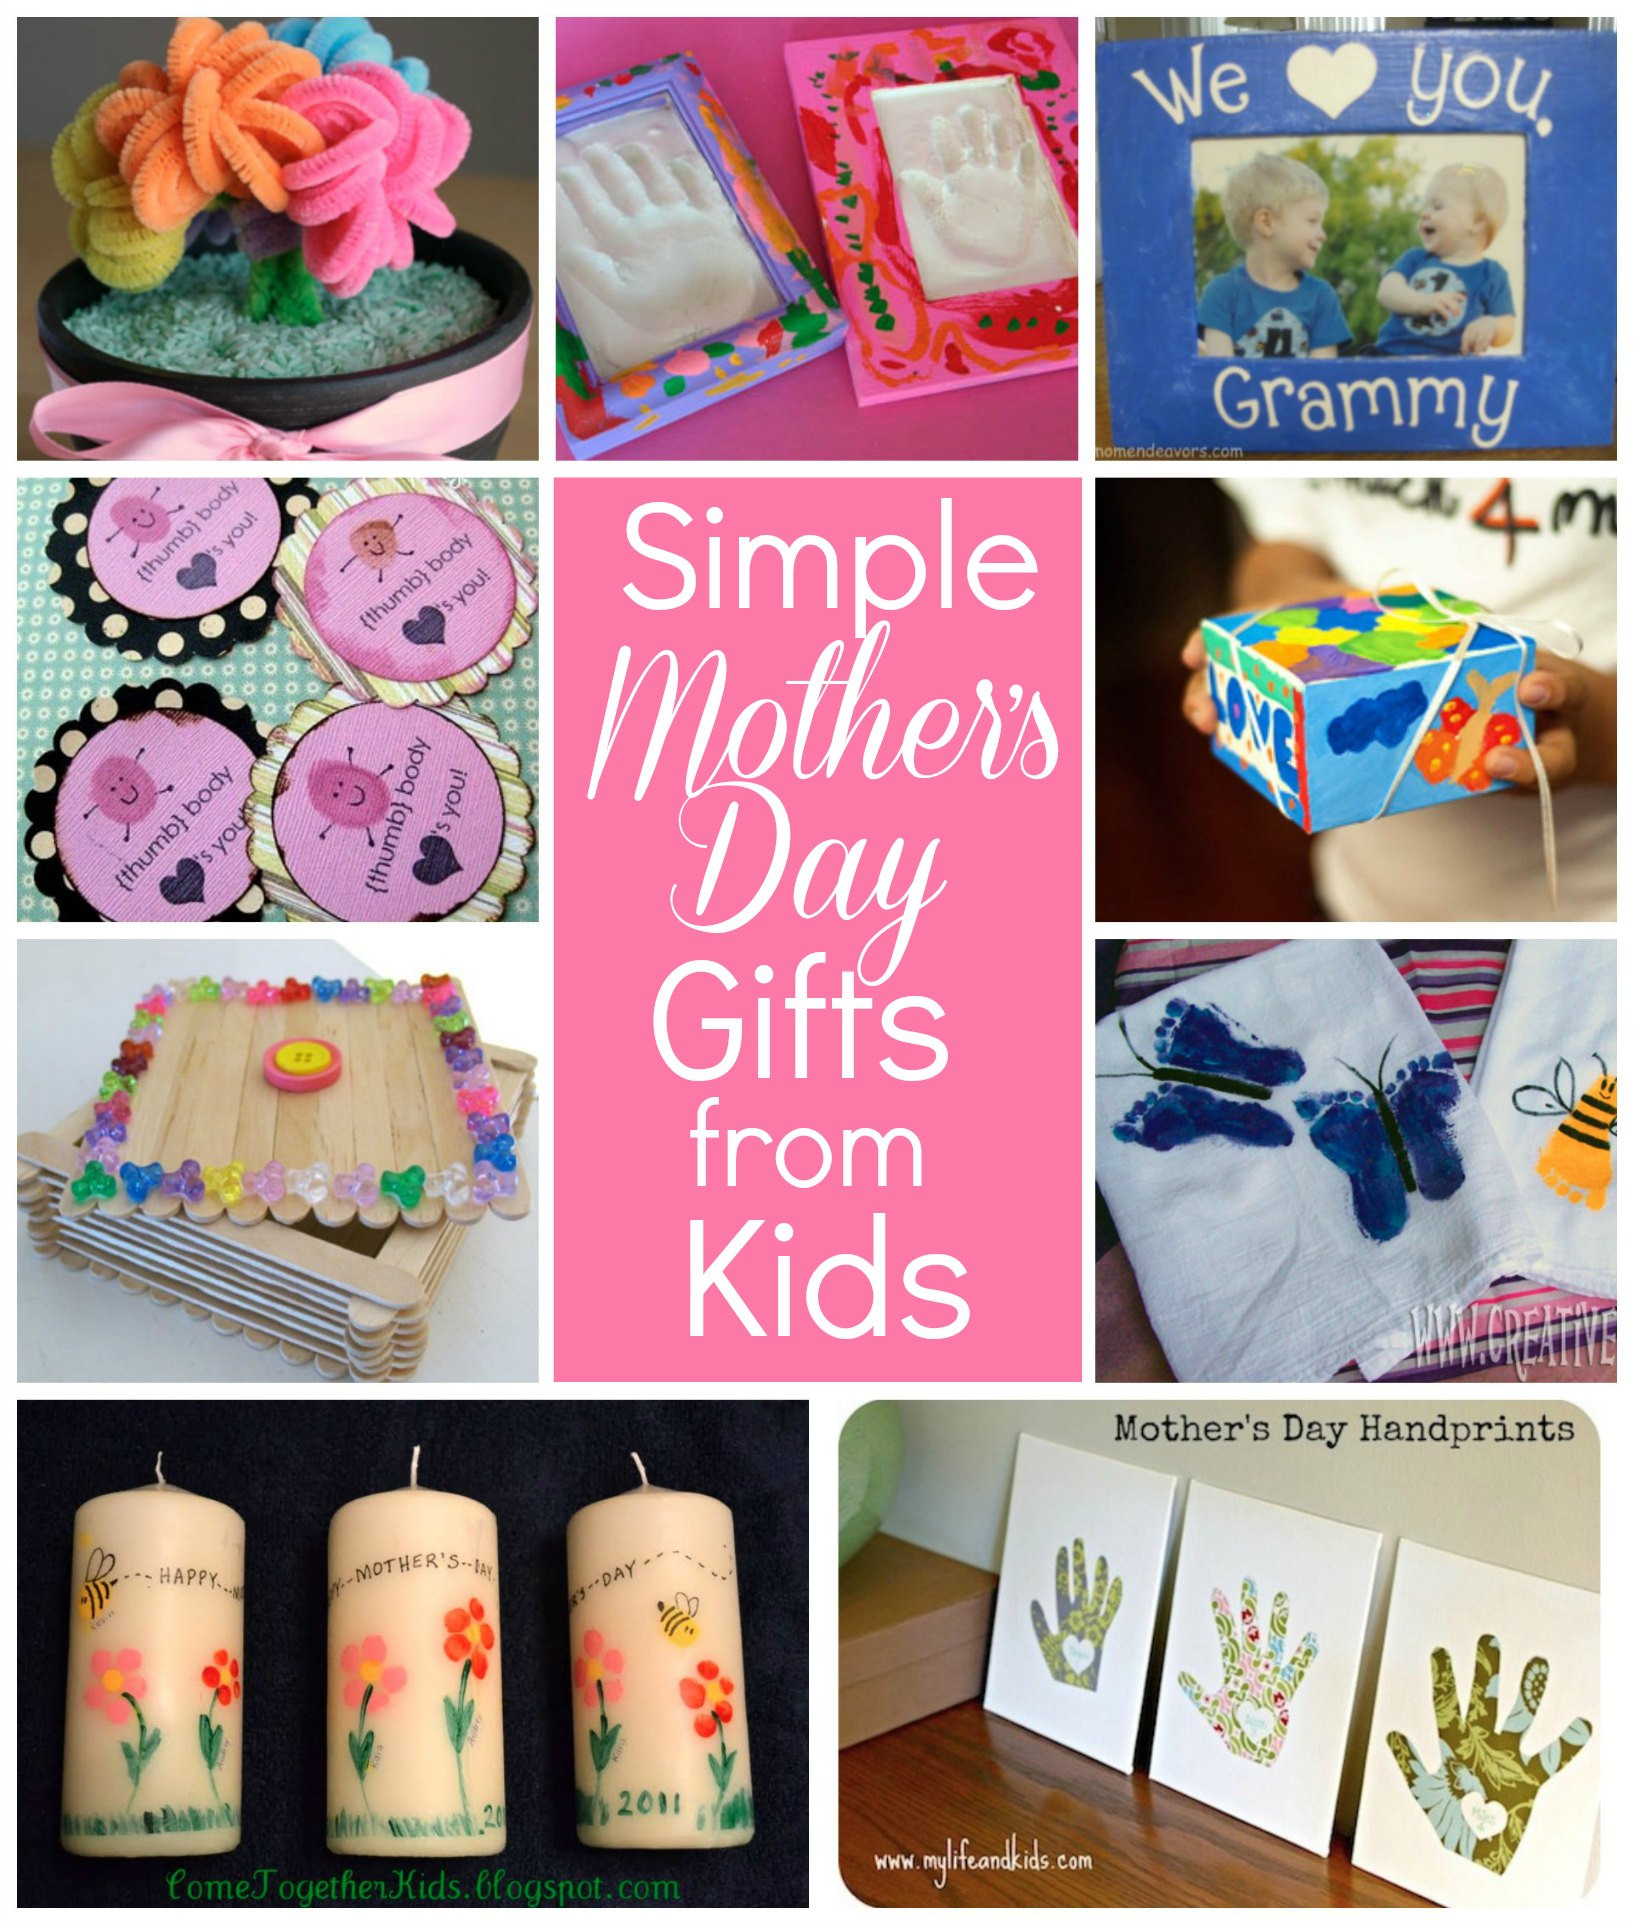 Mothers Day Gift Ideas For Grandma
 Simple Mother’s Day t ideas for grandma Flower pot